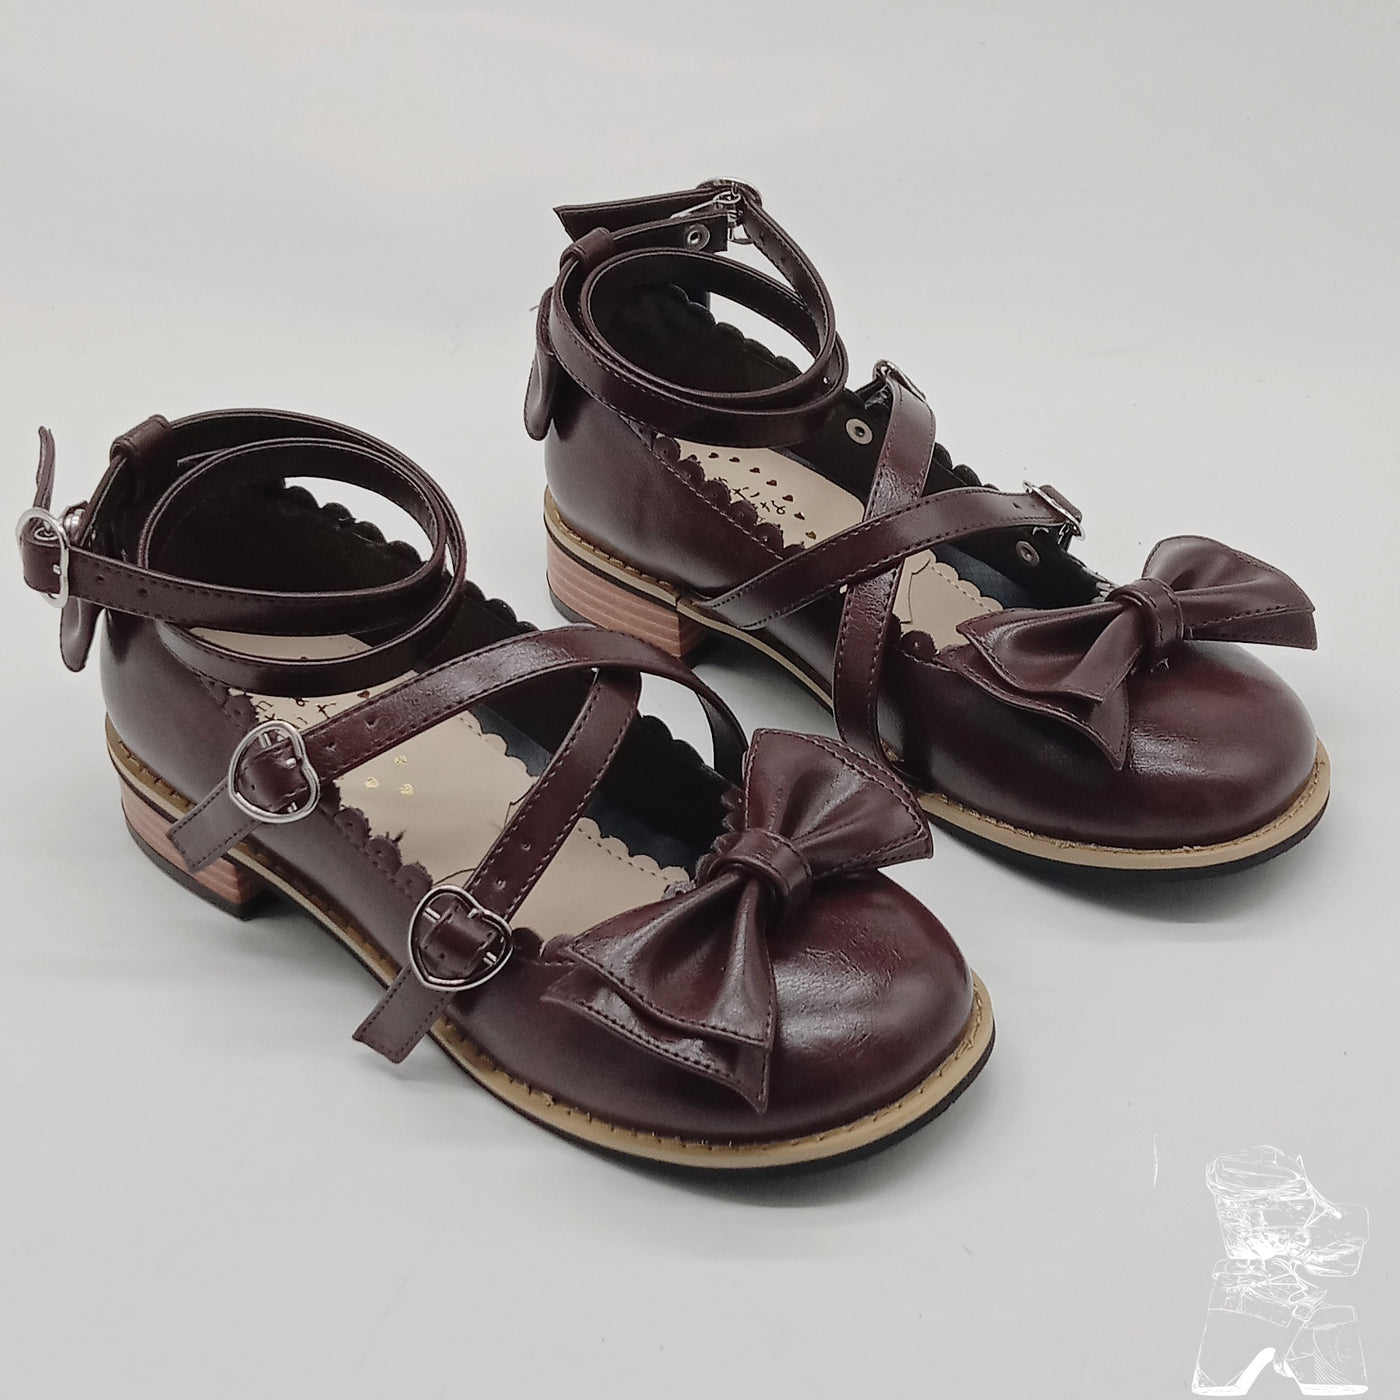 Antaina~ Japanese Style Lolita Tea Party Shoes Size 34-37 34 matte coffee (heel 2.5cm) 